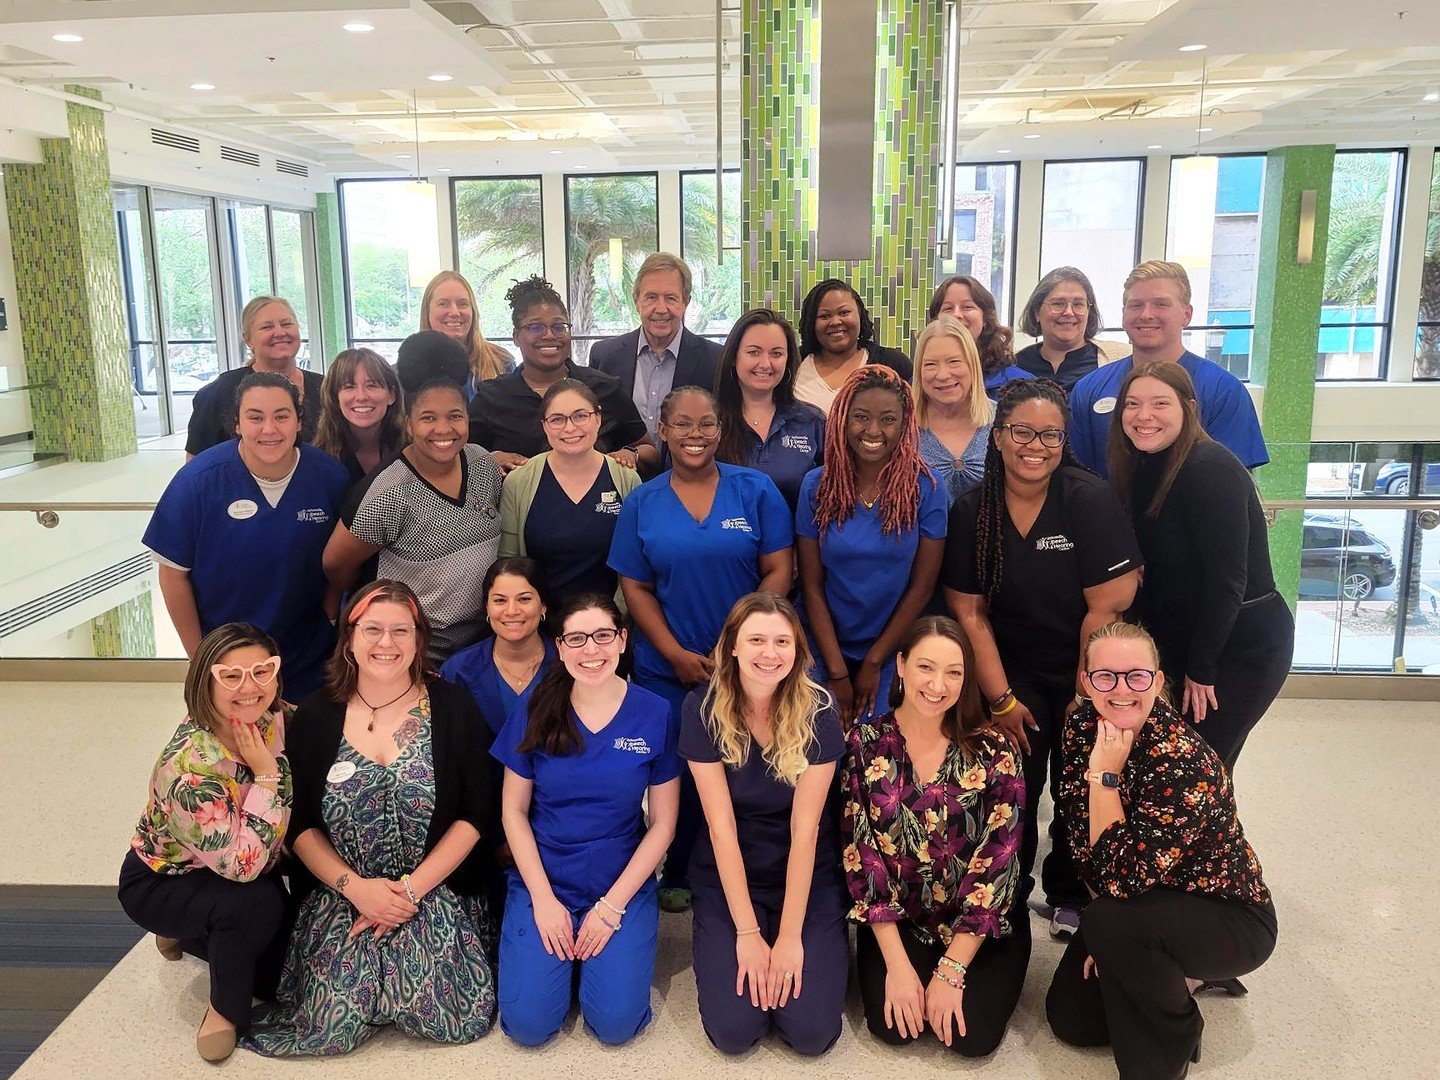 May is recognized as National Speech-Language-Hearing Month, so we want to spotlight our tenant, Jacksonville Speech &amp; Hearing Center. This month gives us an opportunity to raise awareness about communication disorders and the role of employees a